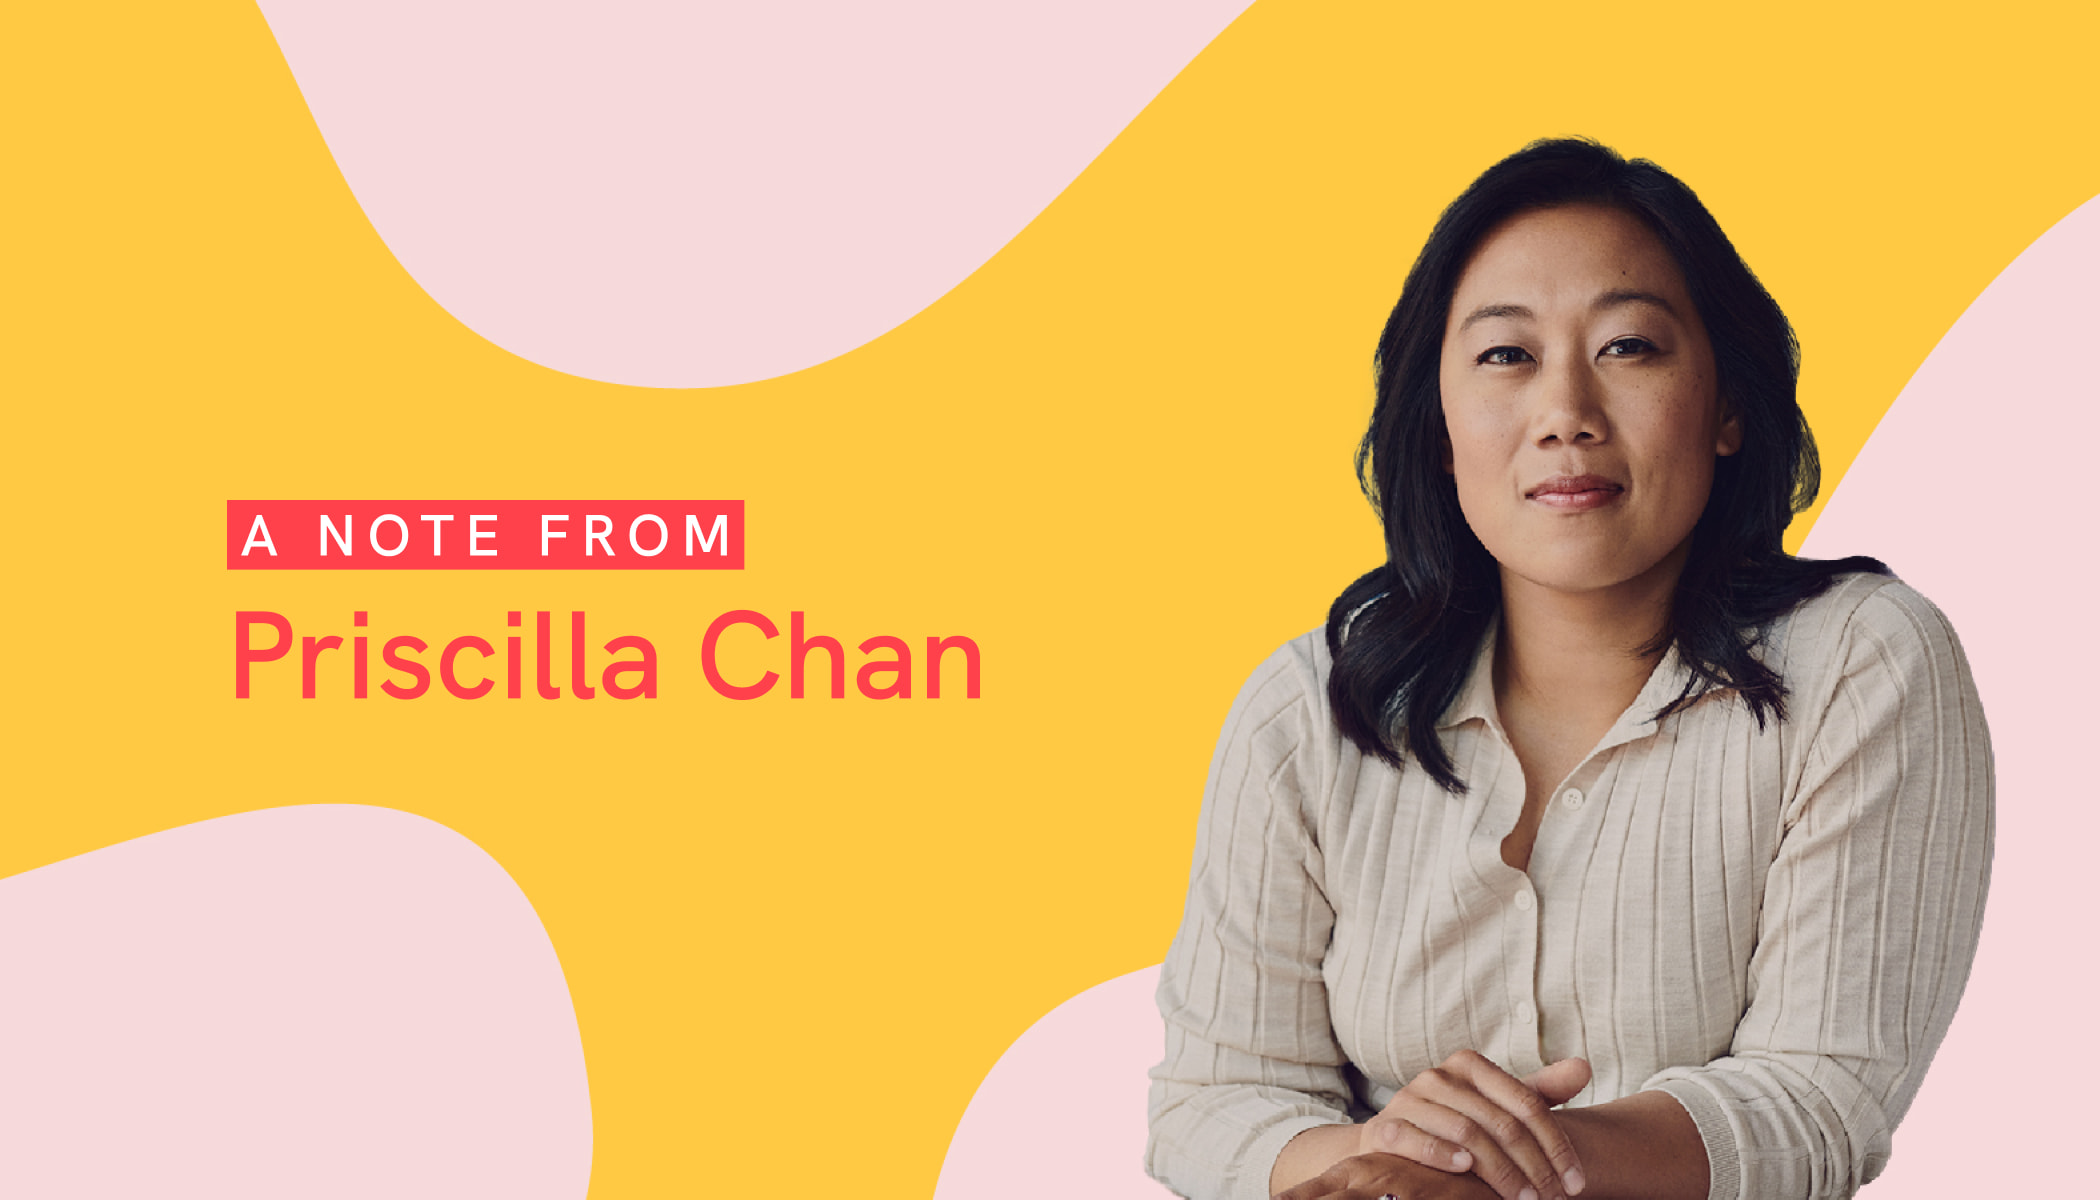 Priscilla Chan, co-CEO of the Chan Zuckerberg Initiative, looking at the camera with her arms folded and in front of a yellow and pink illustrated background.